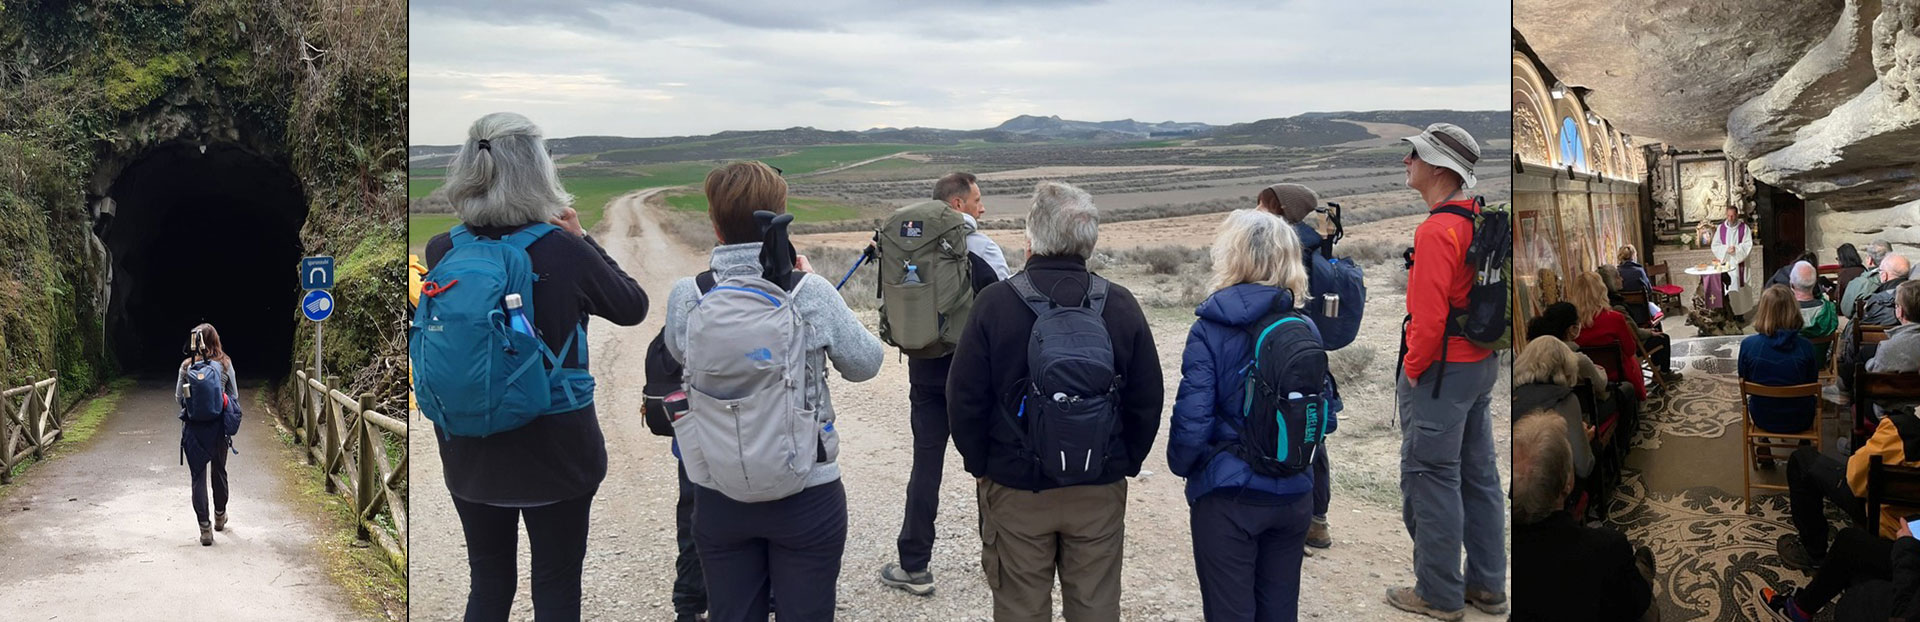 The Camino Ignaciano: an adventure with God and others